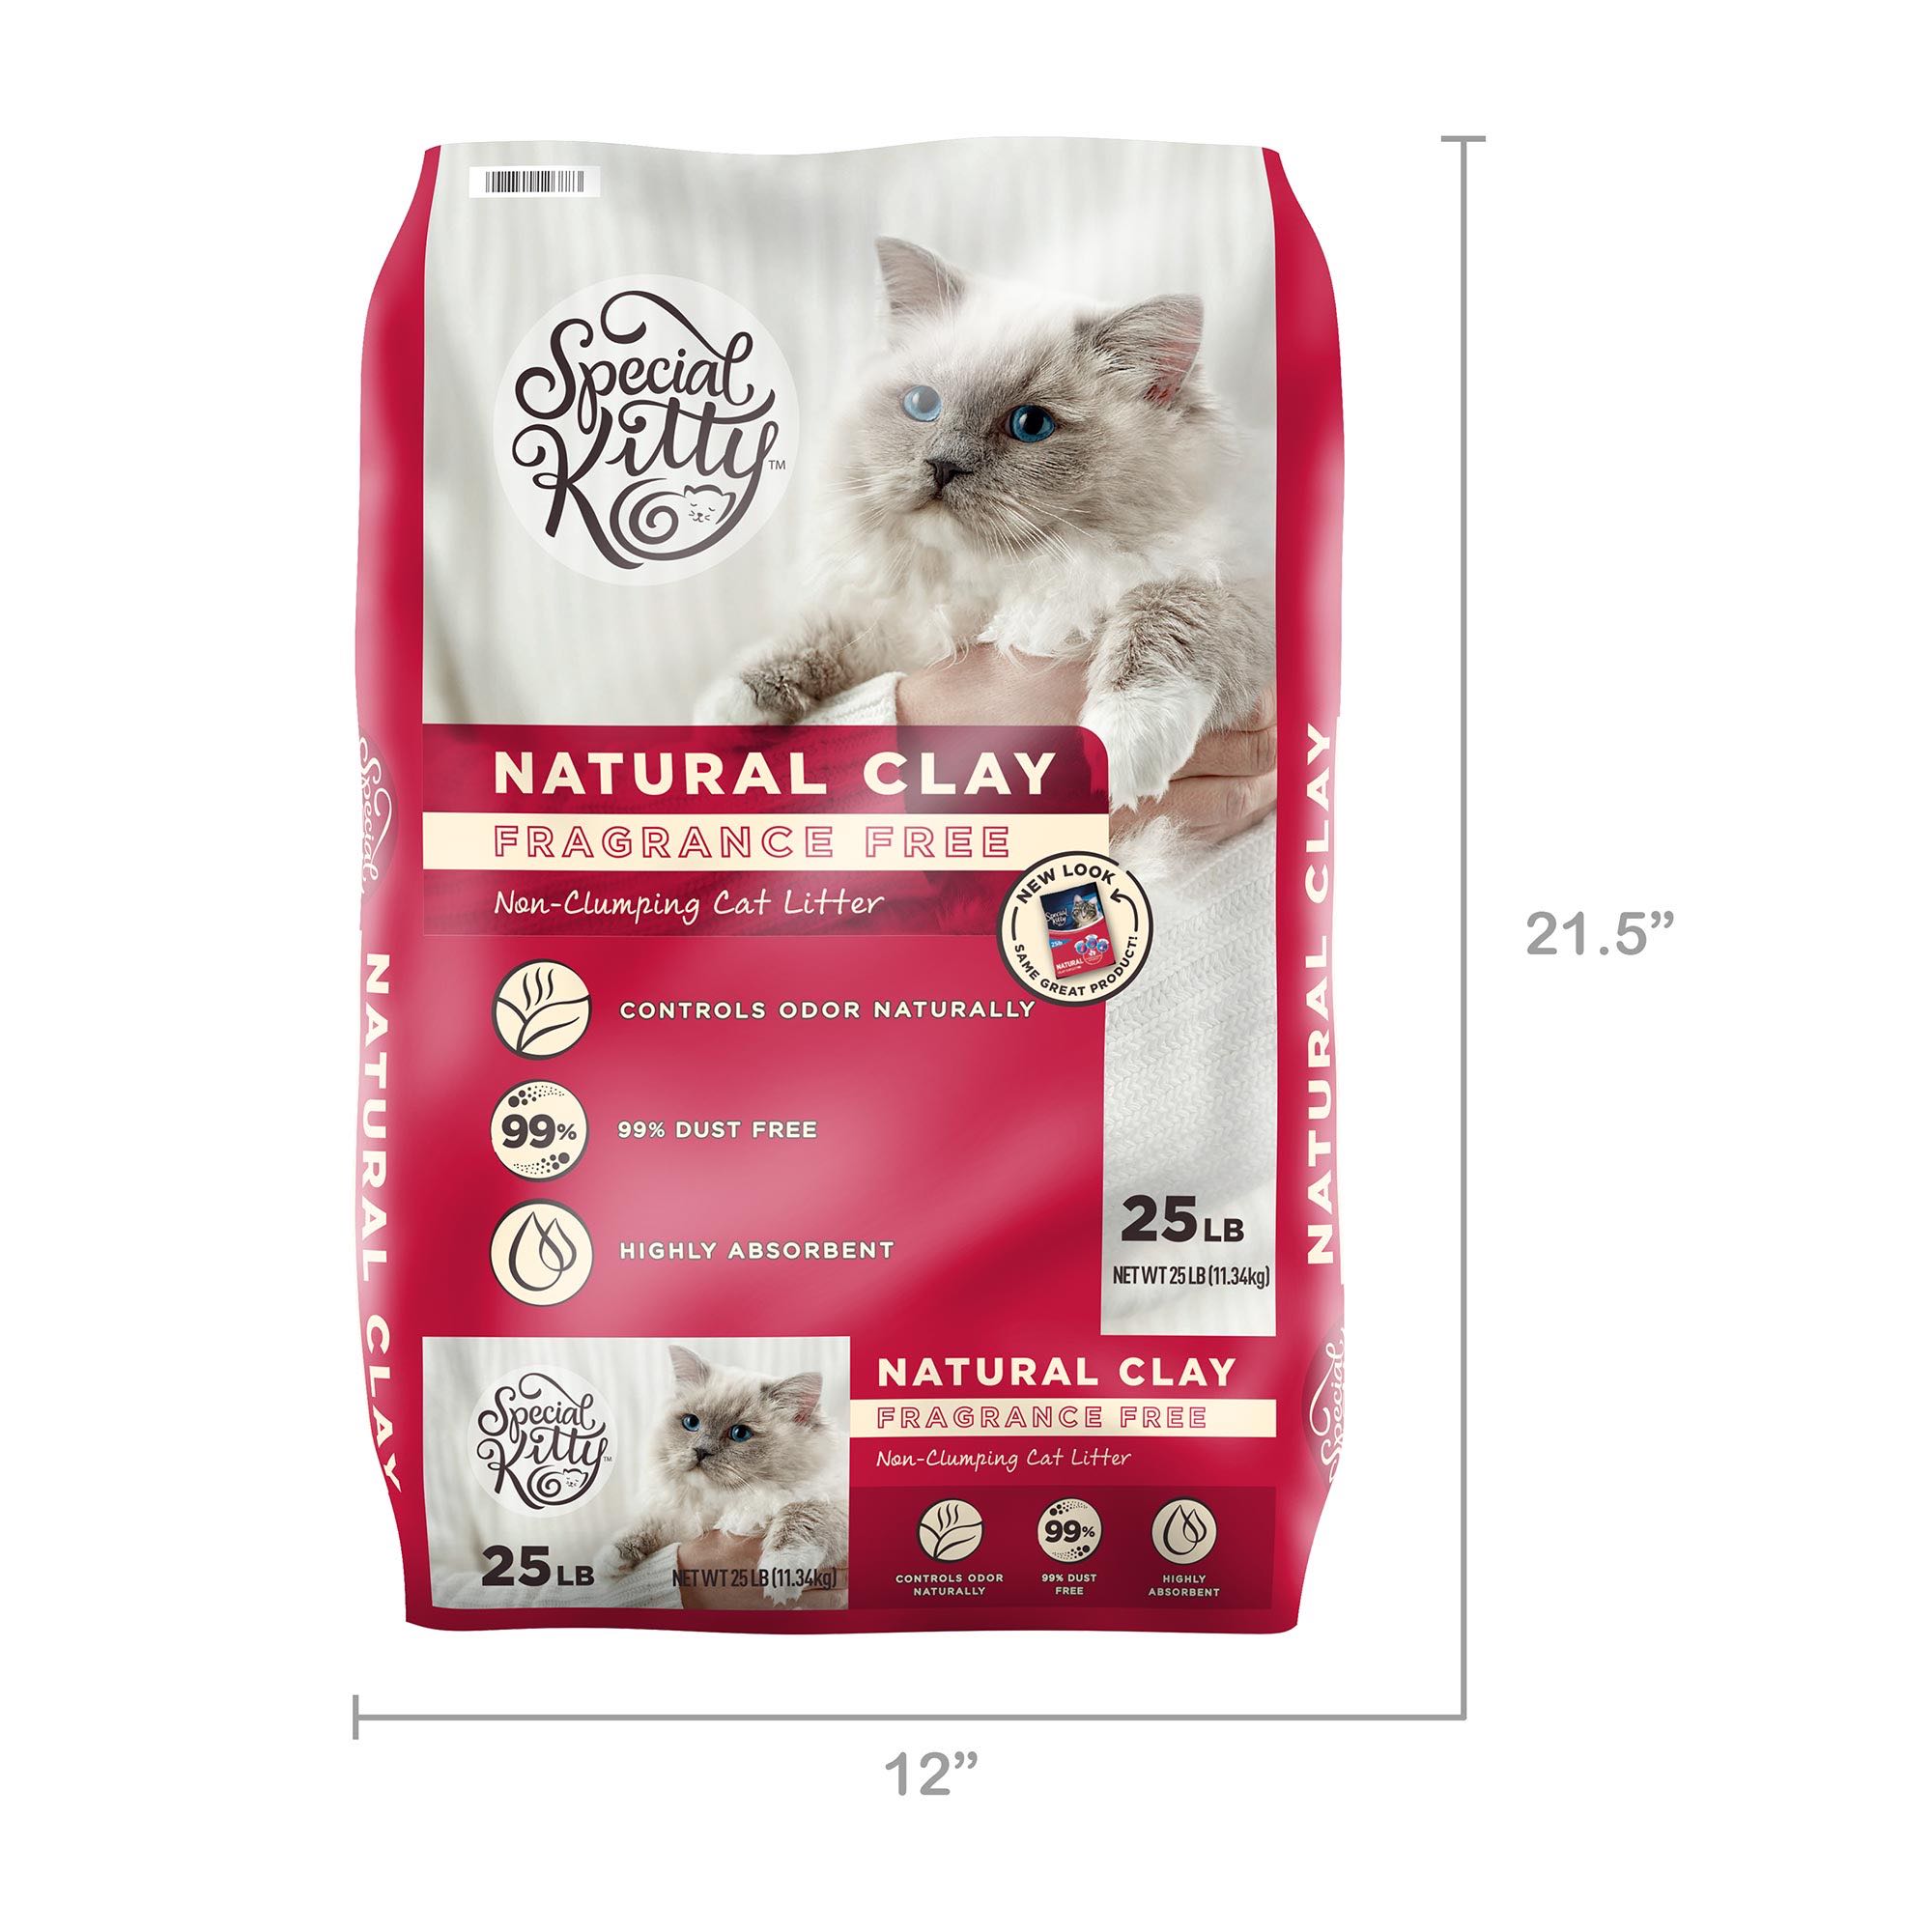 Special Kitty Fragrance Free Natural Clay Non-Clumping Cat Litter, 25 lb - image 8 of 10